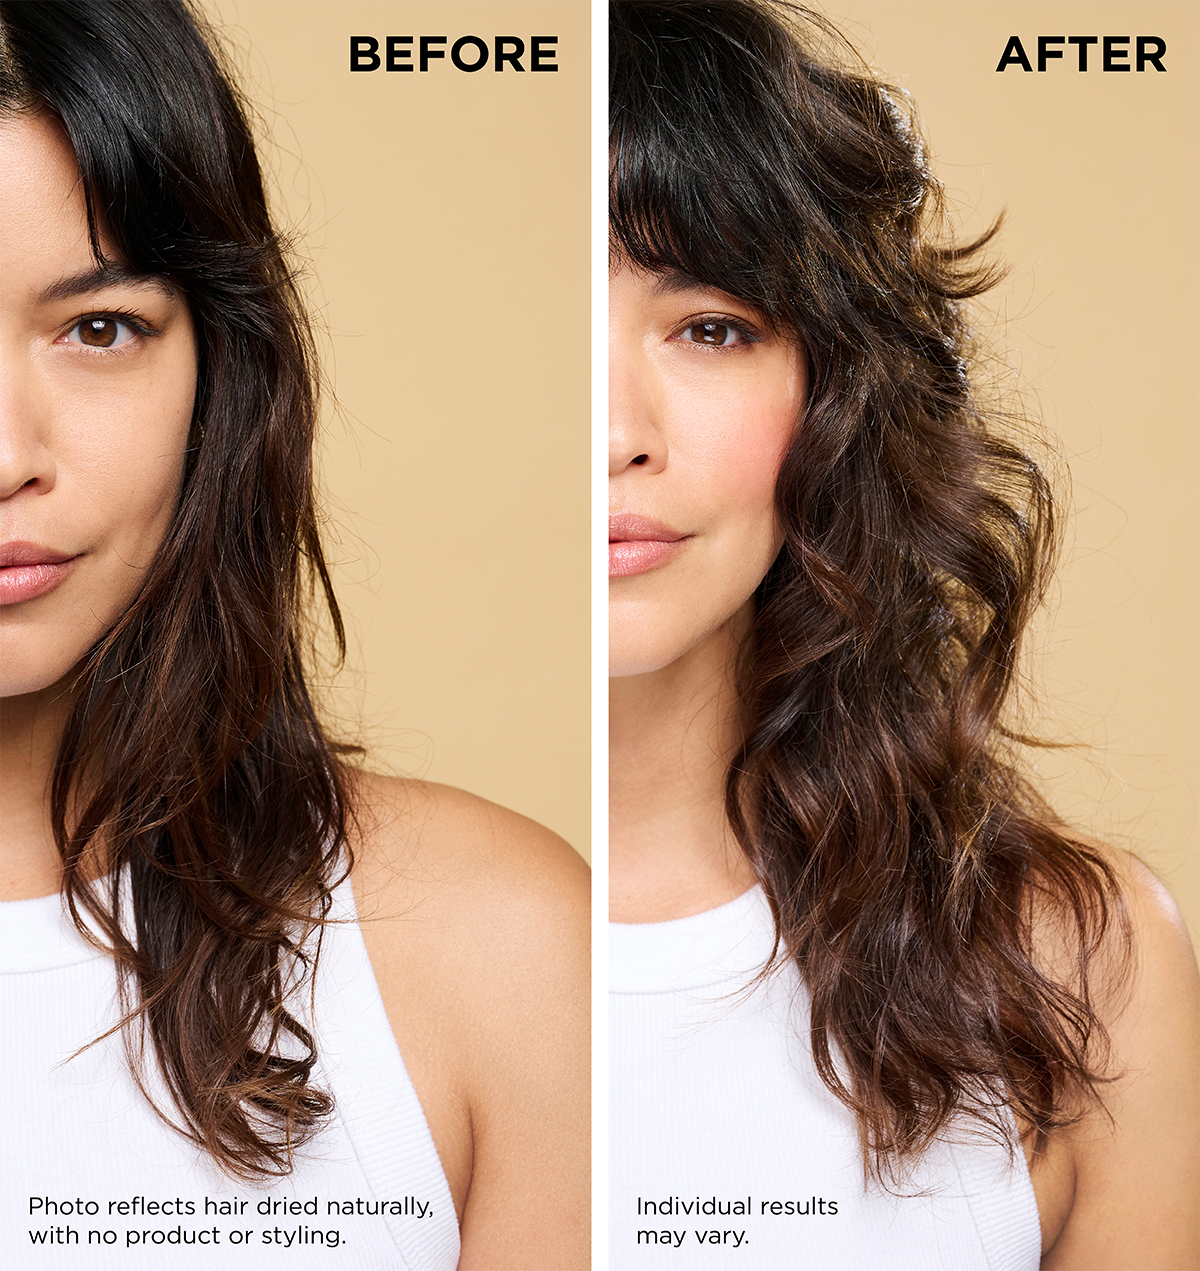 A before and after photo where the model's hair is notably healthier with more volume and shine in the after photo.